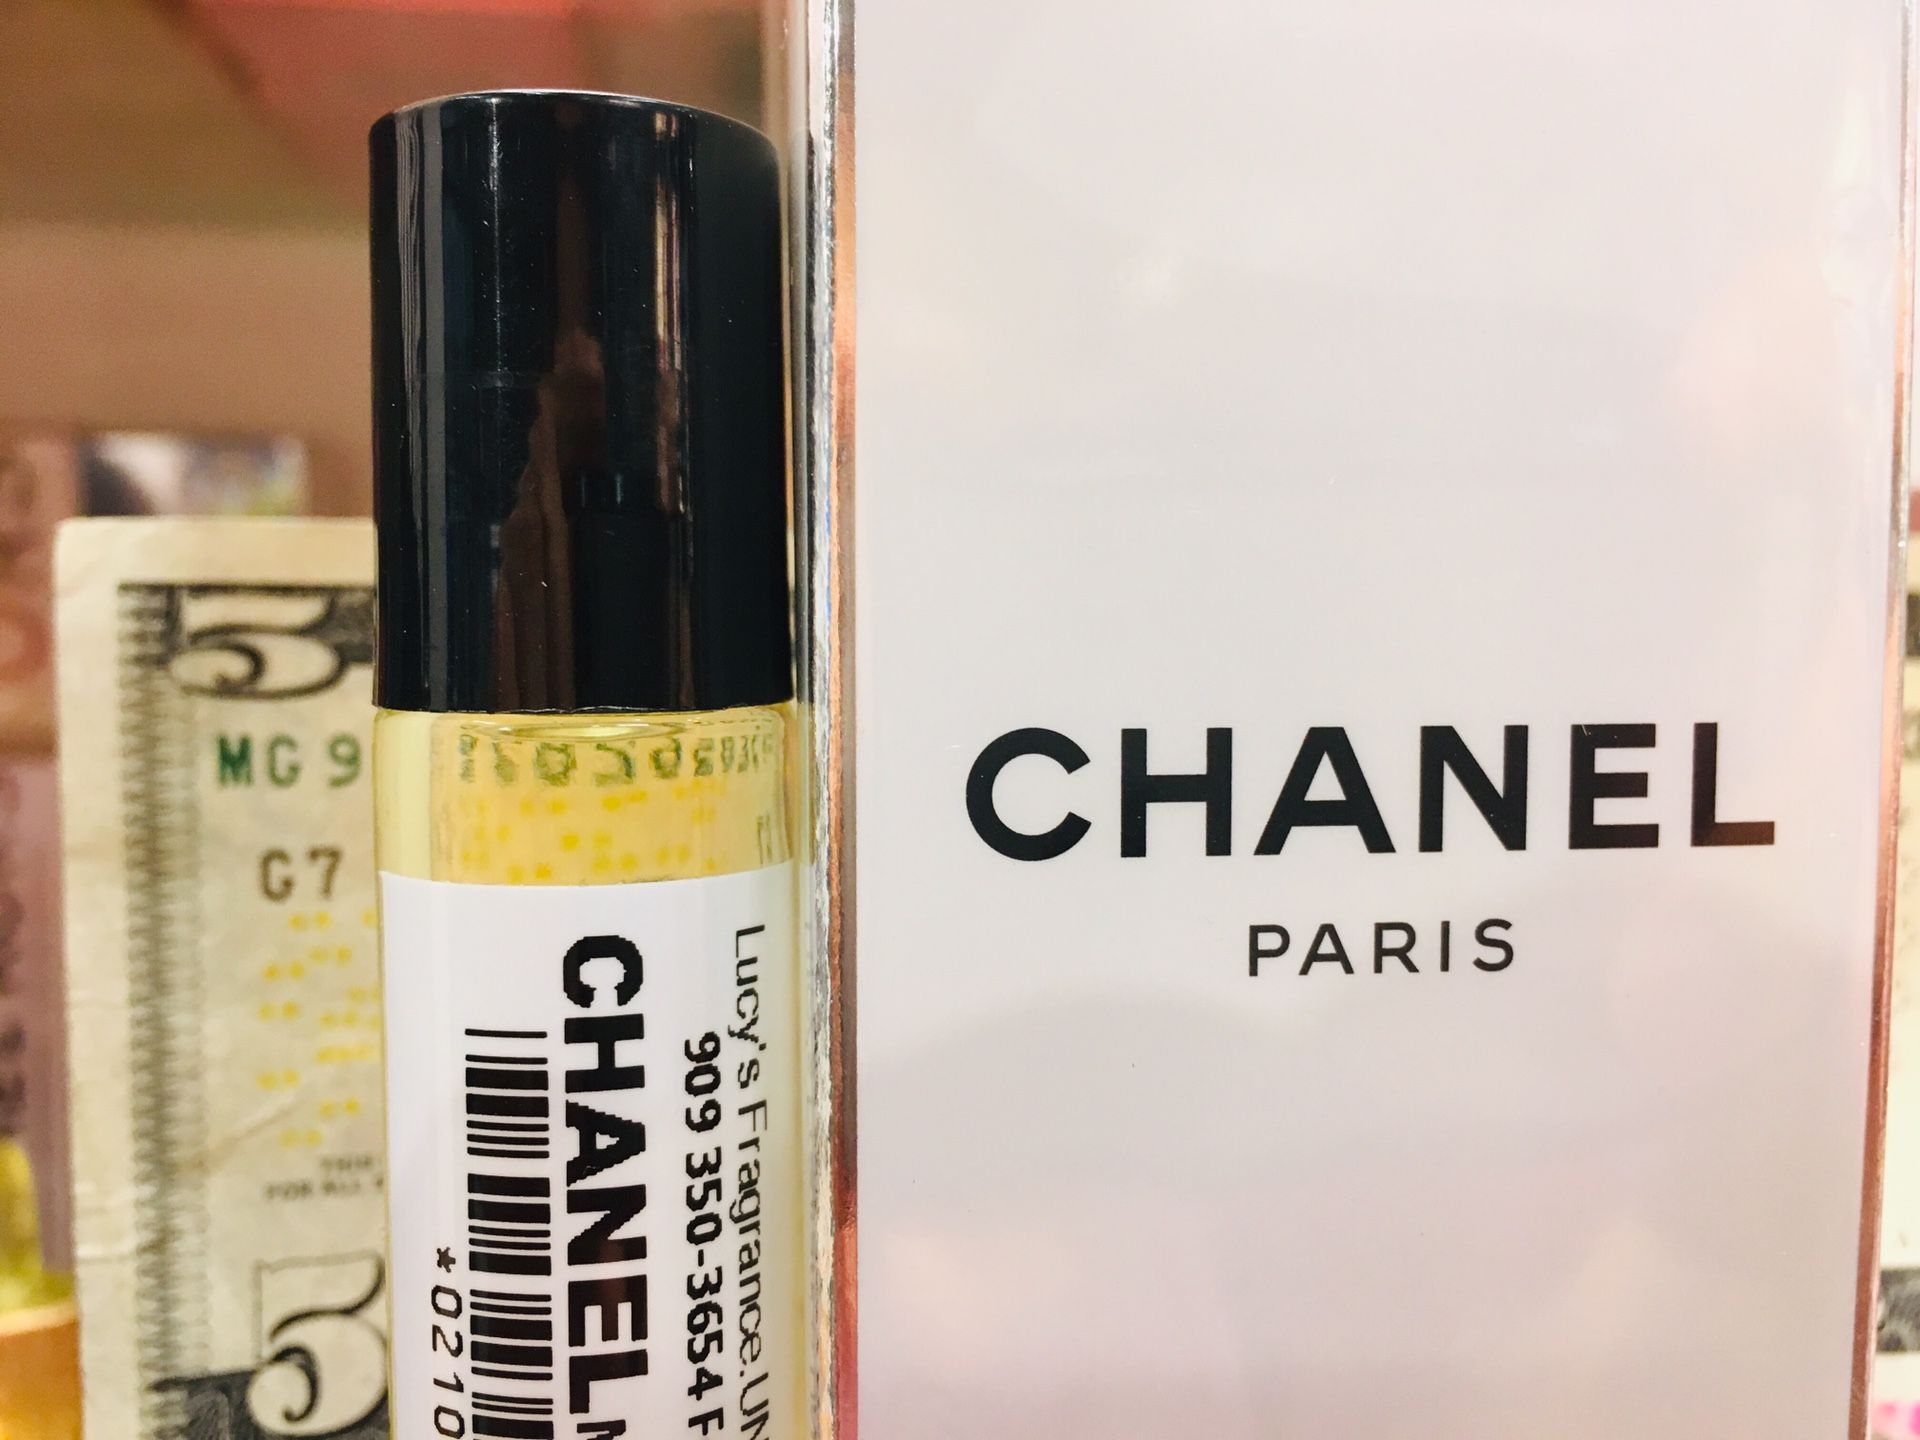 Body Perfume OIL/// CHANEL type for WOMAN🥰